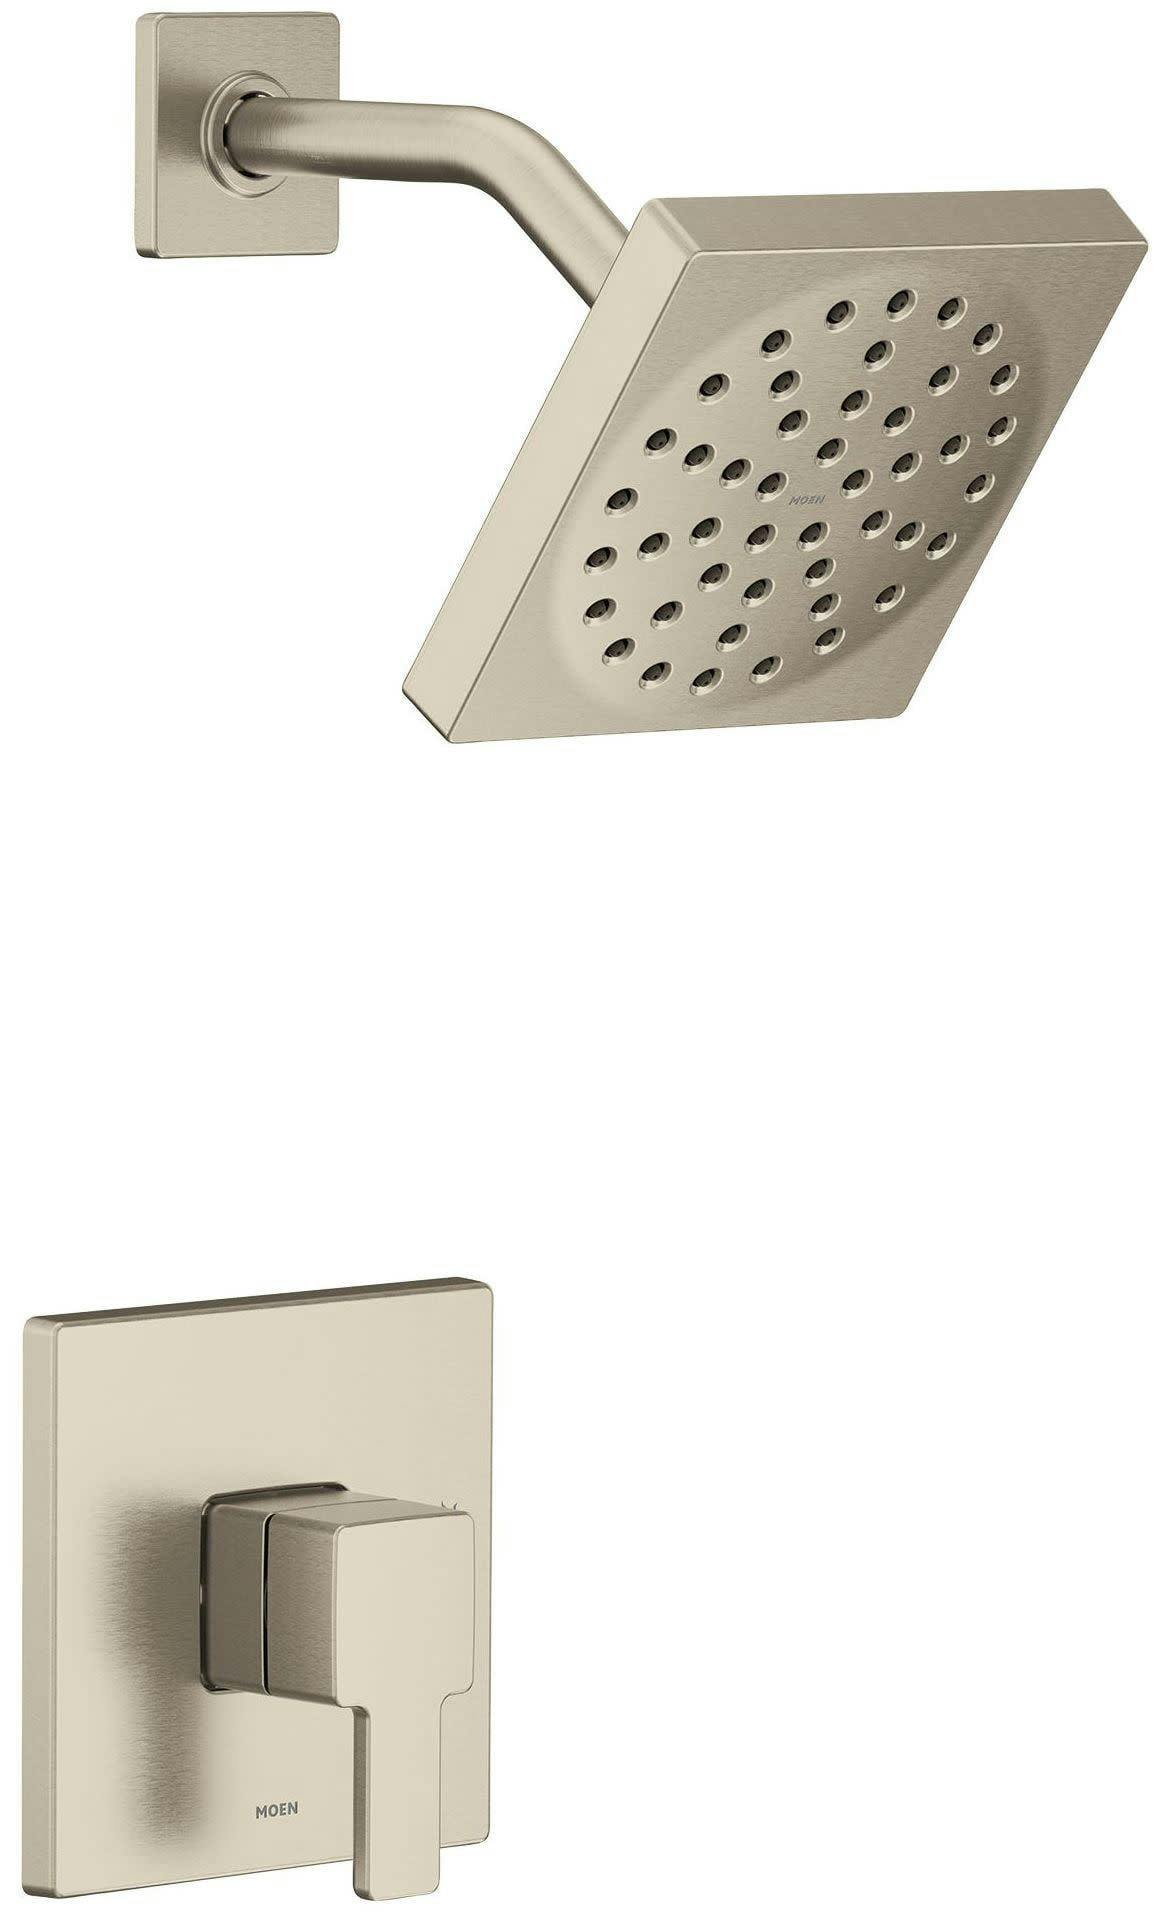 Square Rain Shower Head in Brushed Nickel with Wall Mount